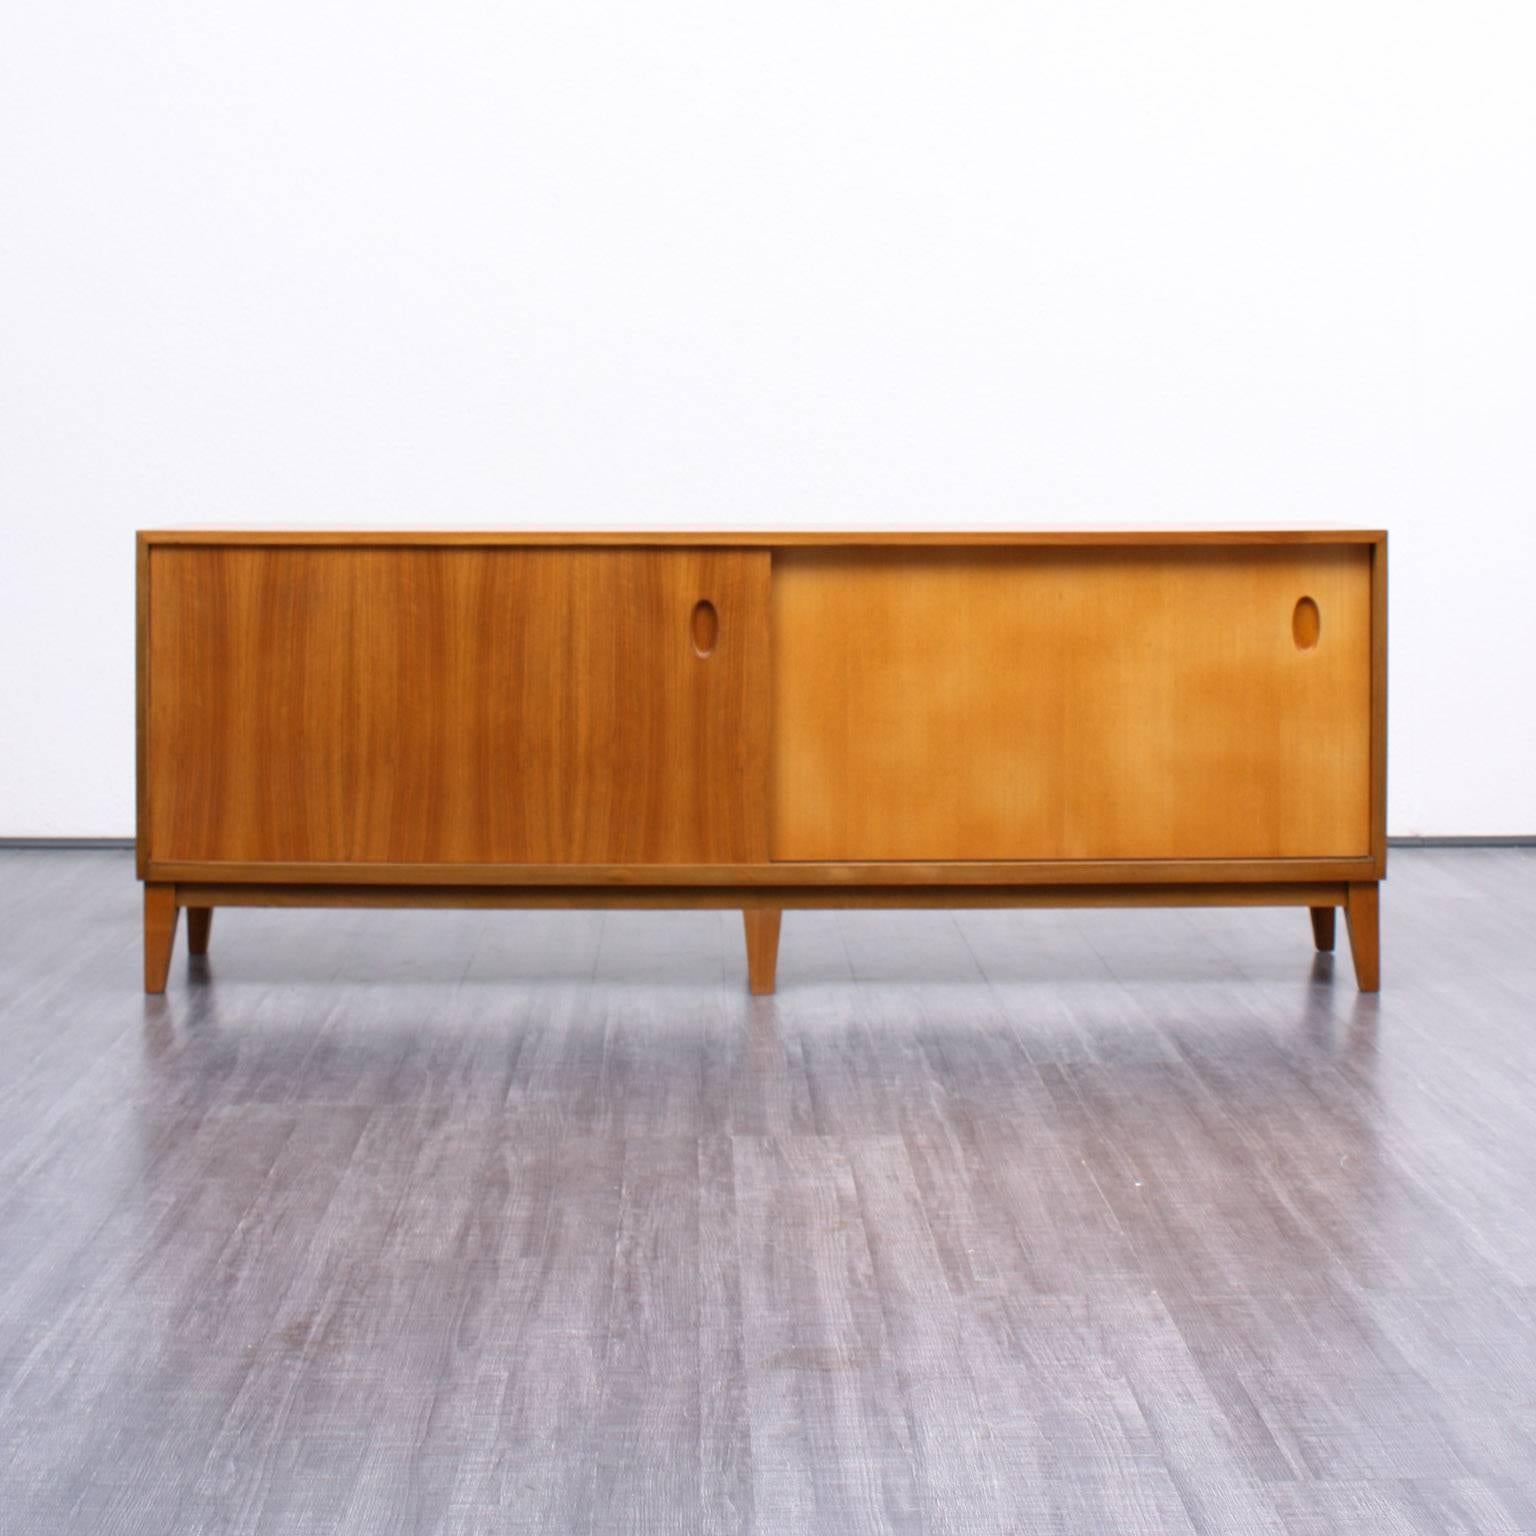 Slim sideboard from the 1950s. Design by Georg Satink for WK Möbel, 1952. Walnut veneer with bicolored sliding doors. High-quality workmanship with nice handles.

Good condition with small traces of usage.